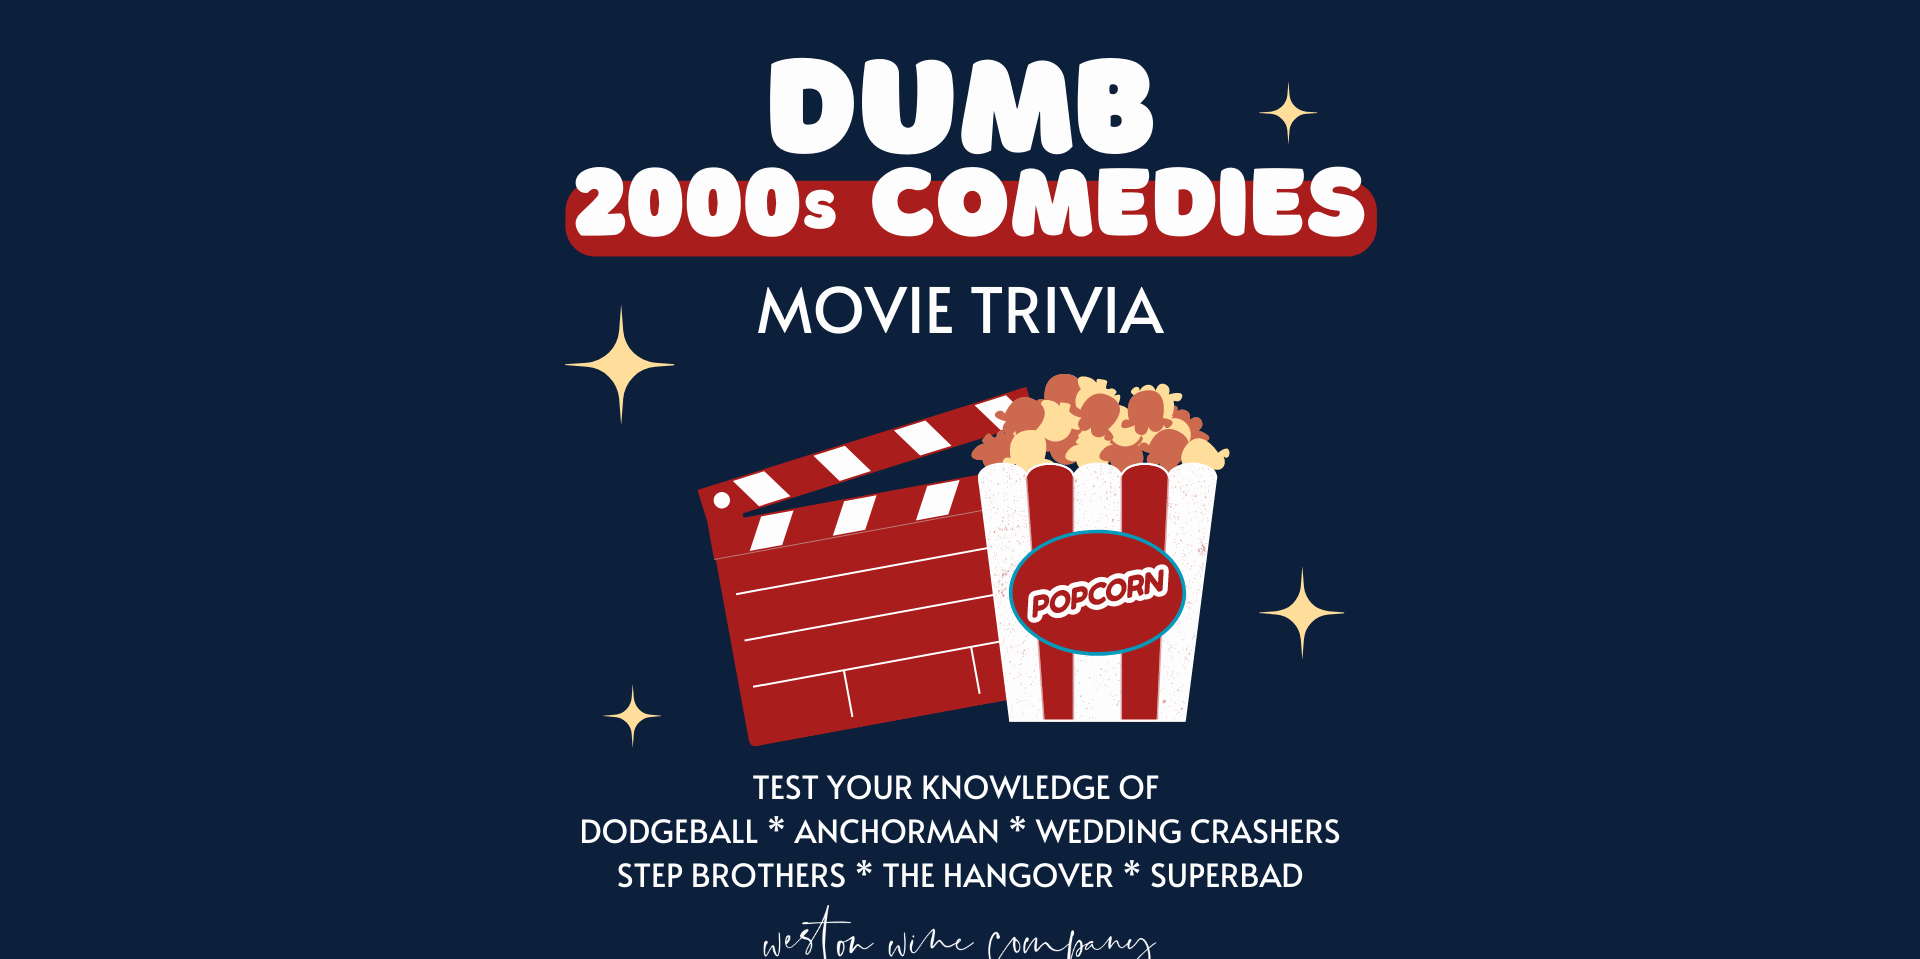 00s Comedies Movie Trivia promotional image